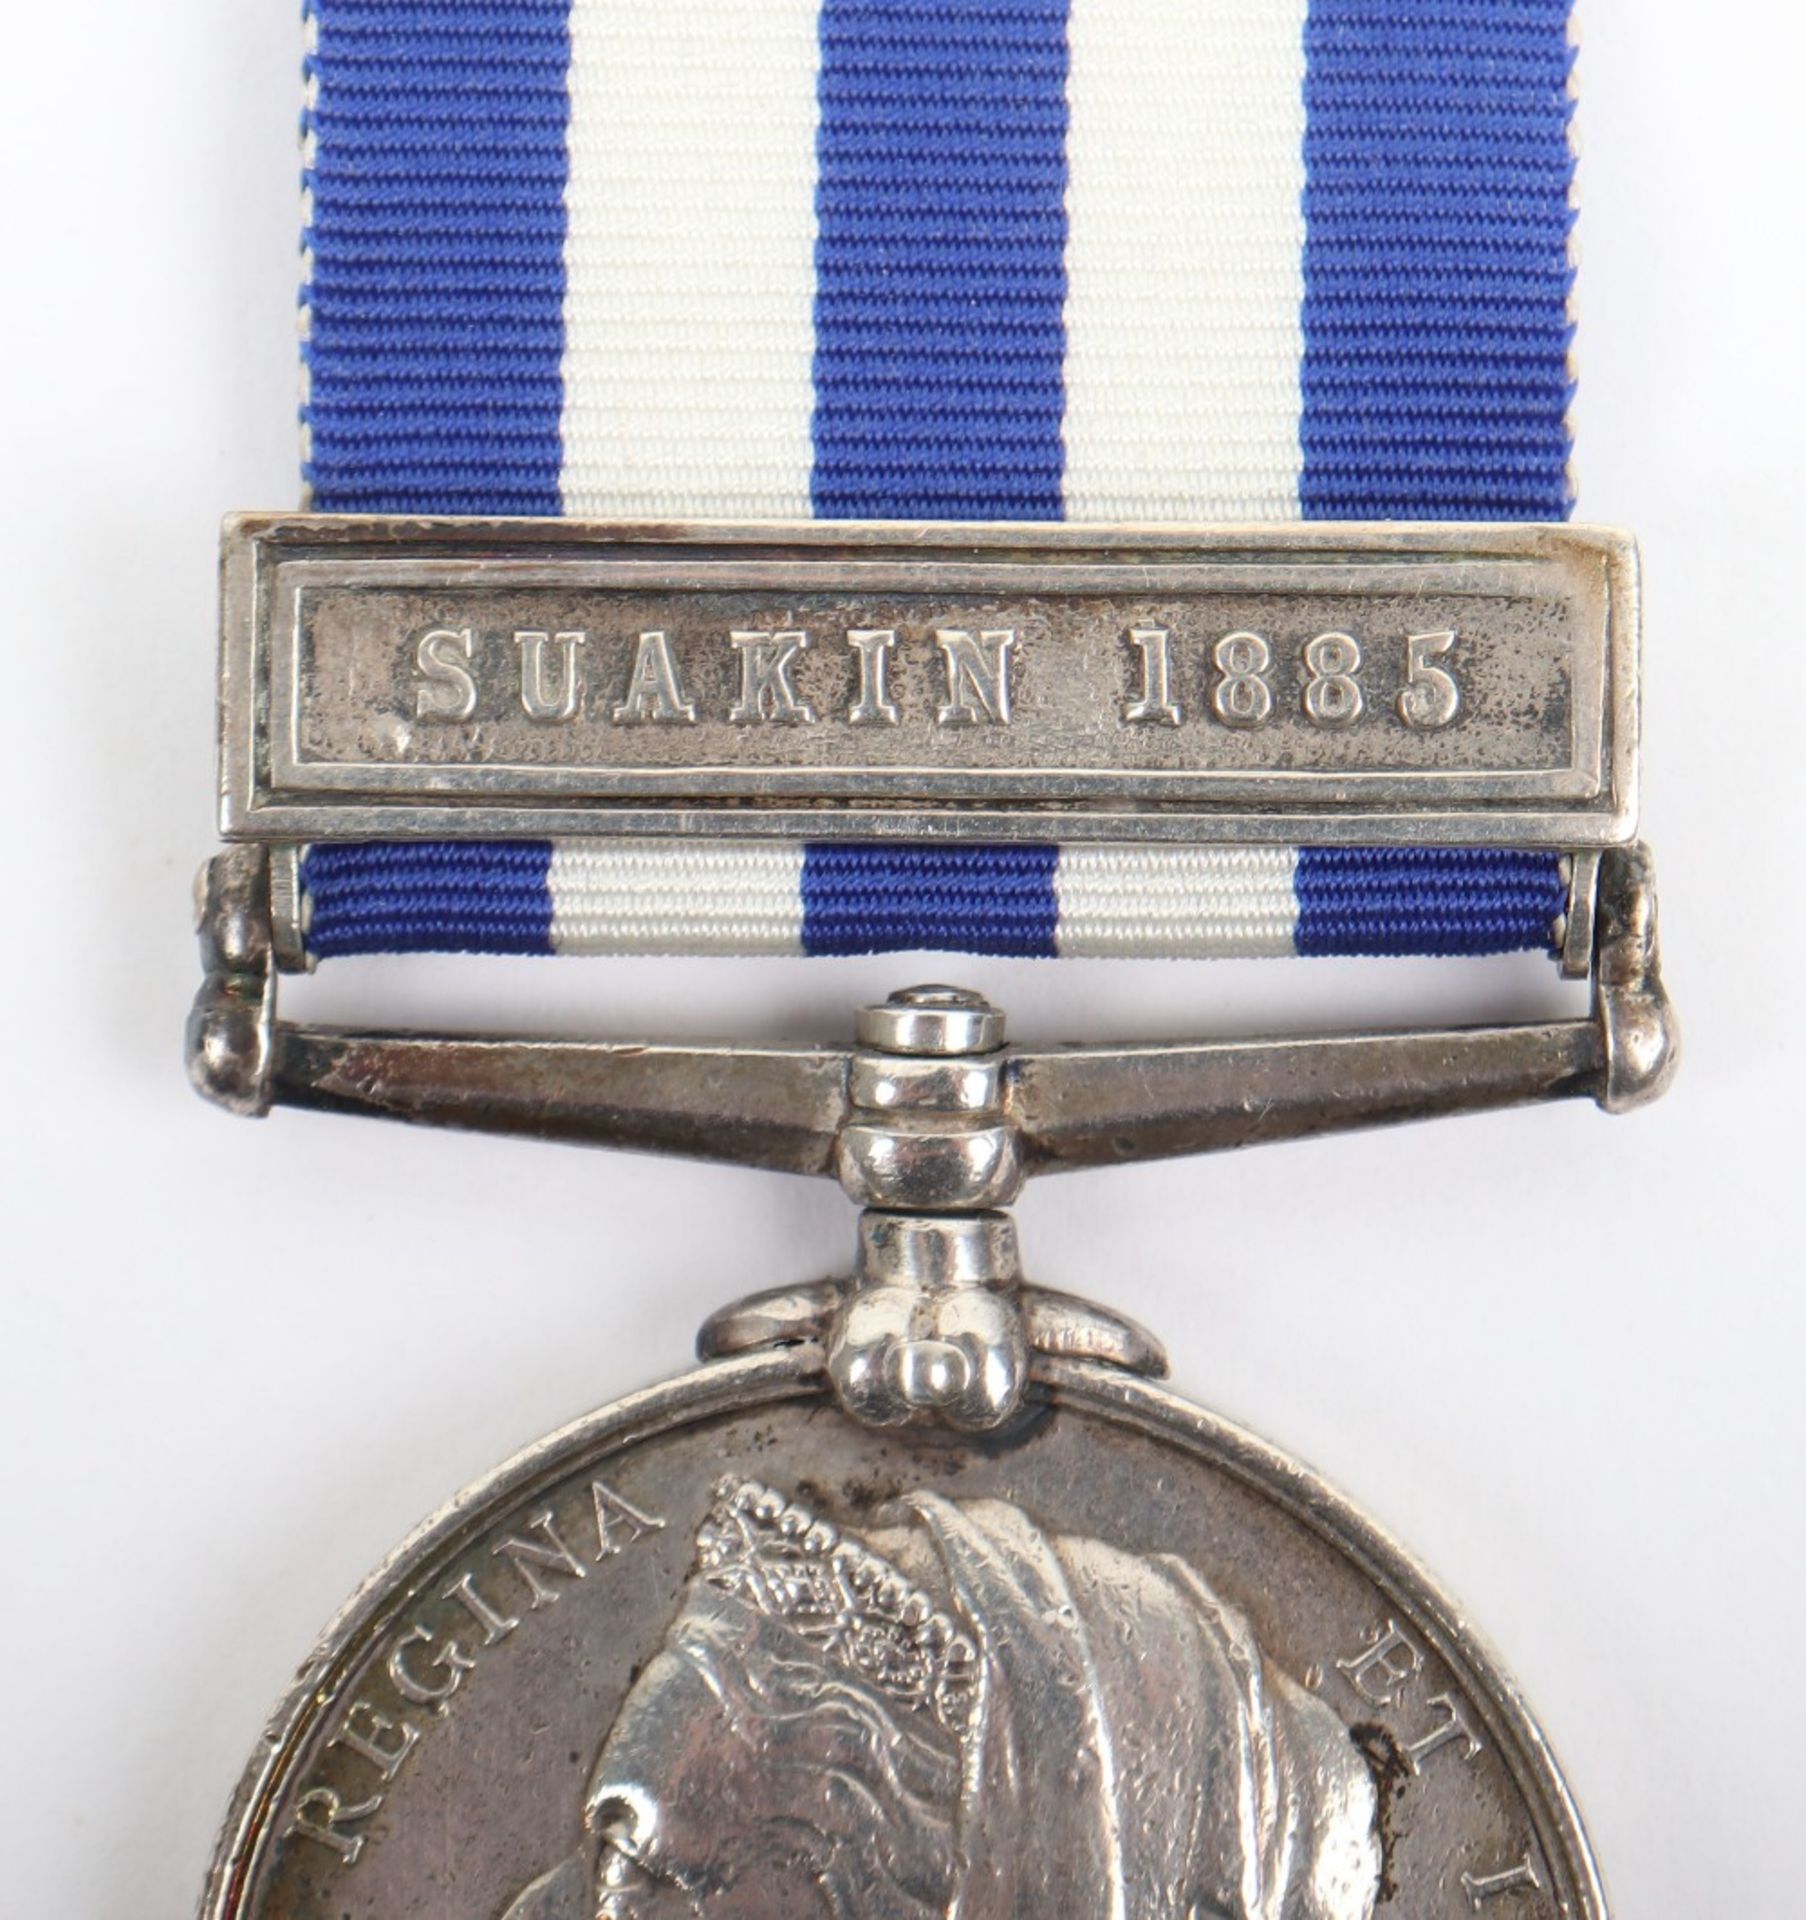 British Egypt and Sudan 1882-89 Campaign Medal 5th Battery 1st Battalion Scottish Royal Artillery - Image 2 of 4